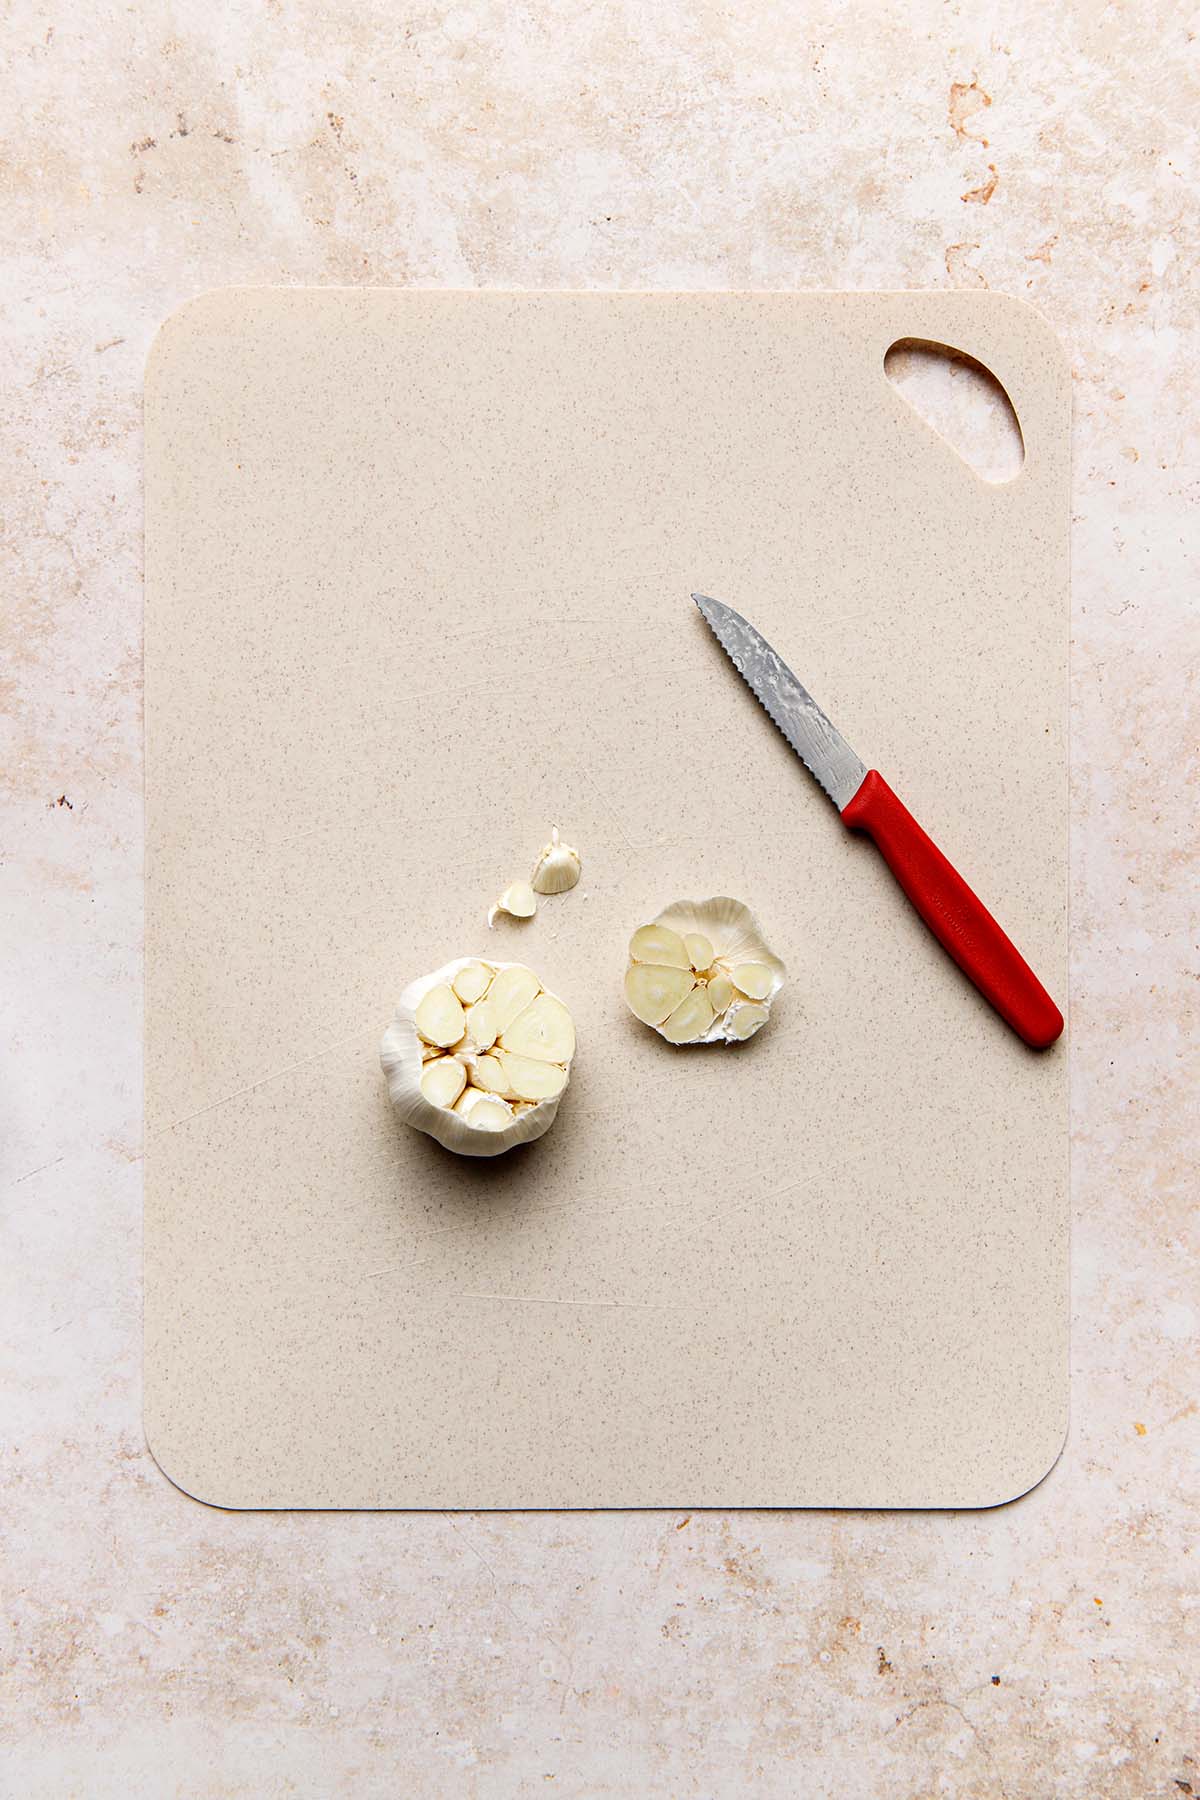 A bulb of garlic on a cutting board with the top sliced off and a small red-handled knife nearby.